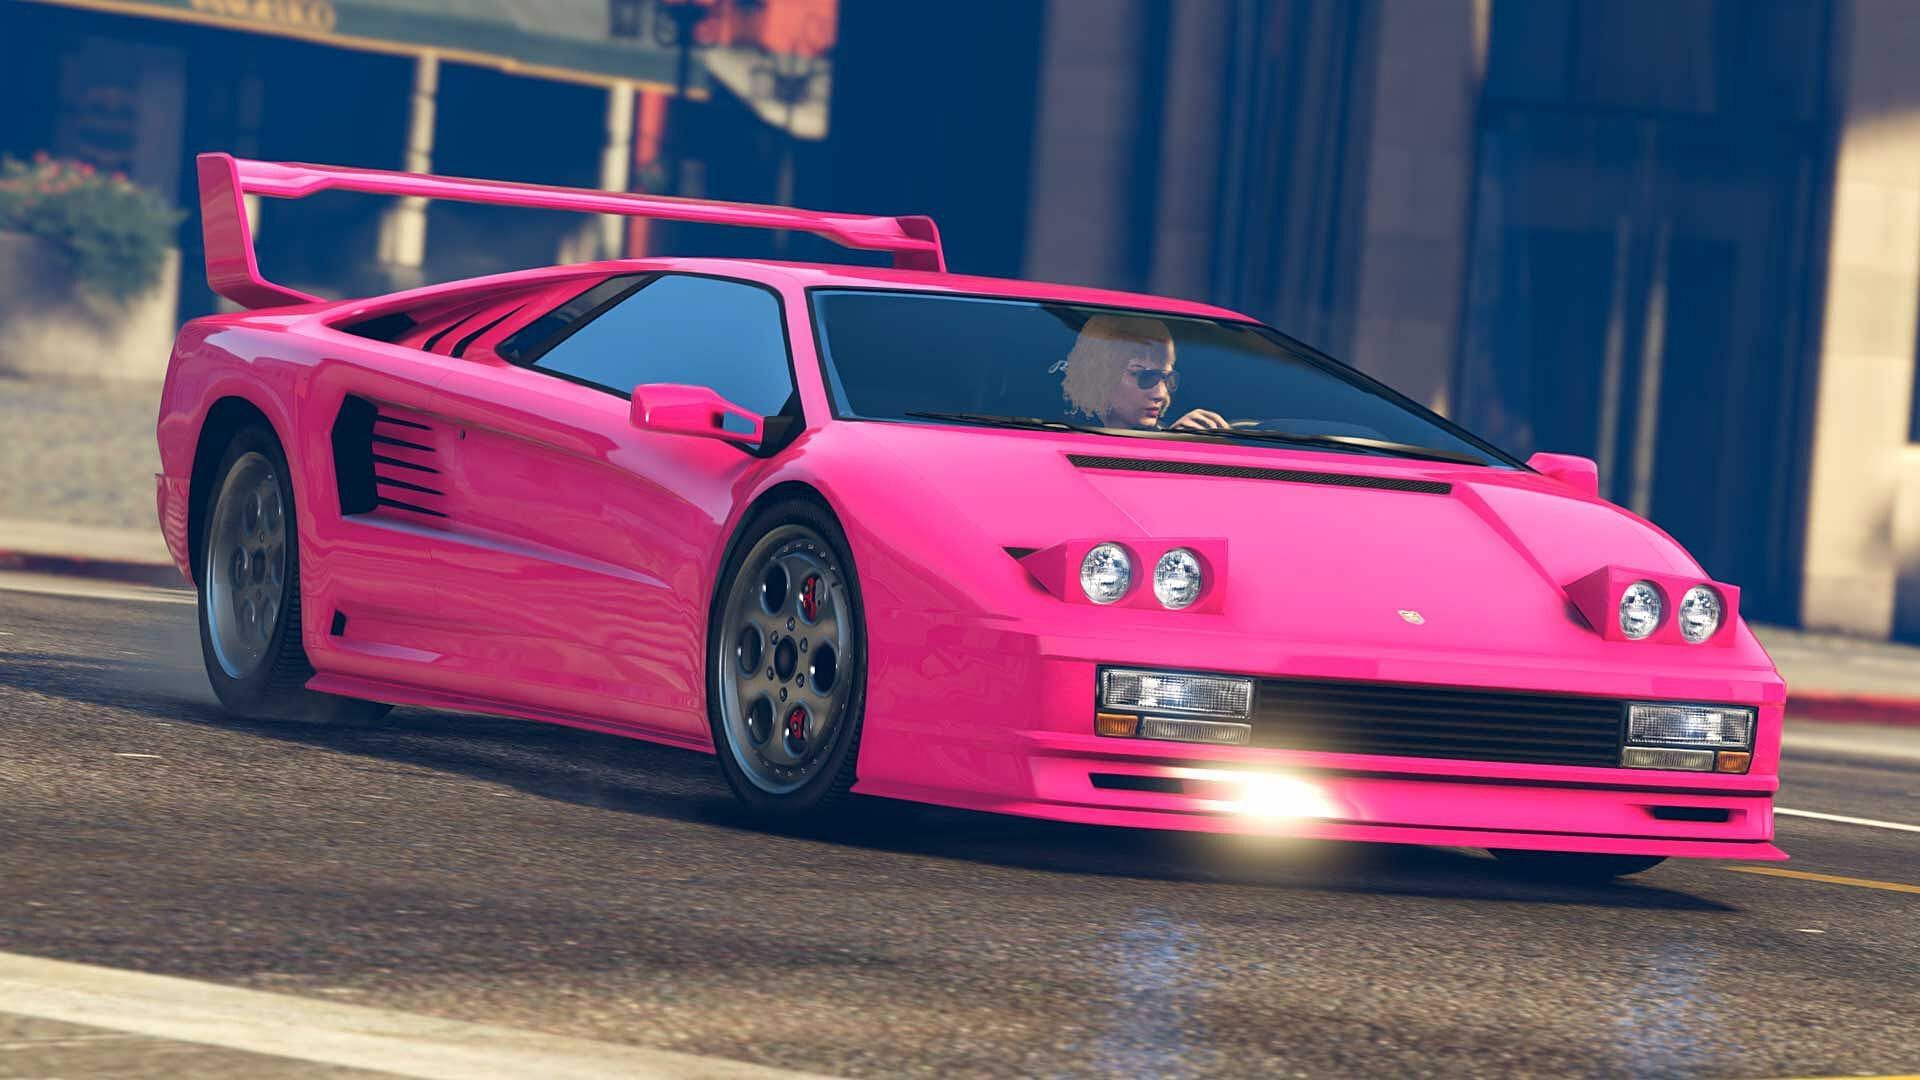 How the Infernus changed throughout the GTA series